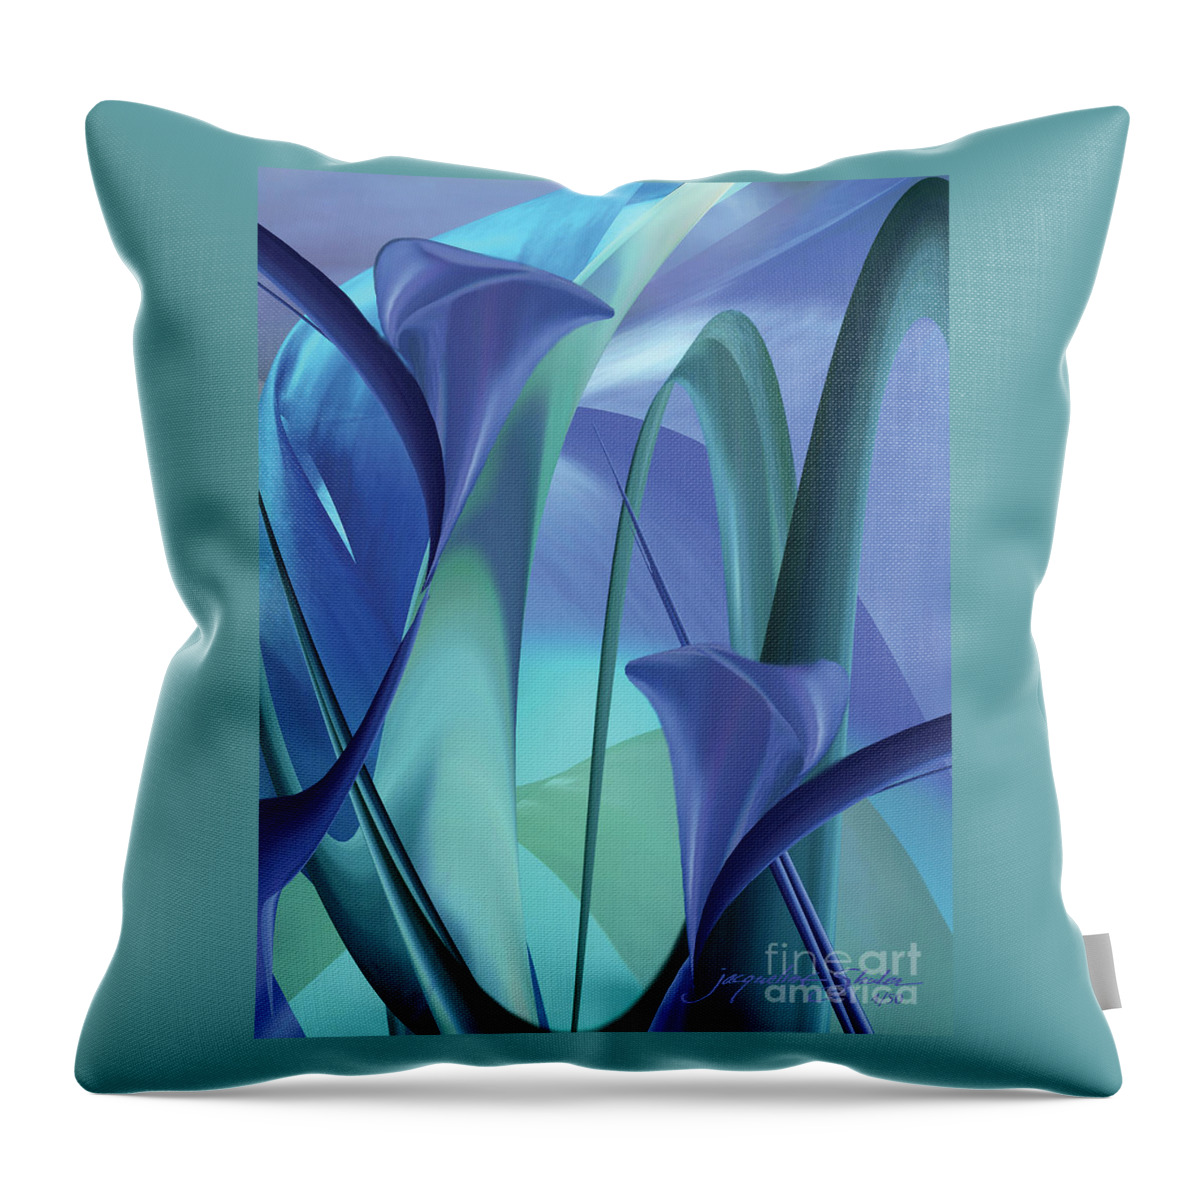 Flowers Throw Pillow featuring the digital art Calla Lilies #1 by Jacqueline Shuler